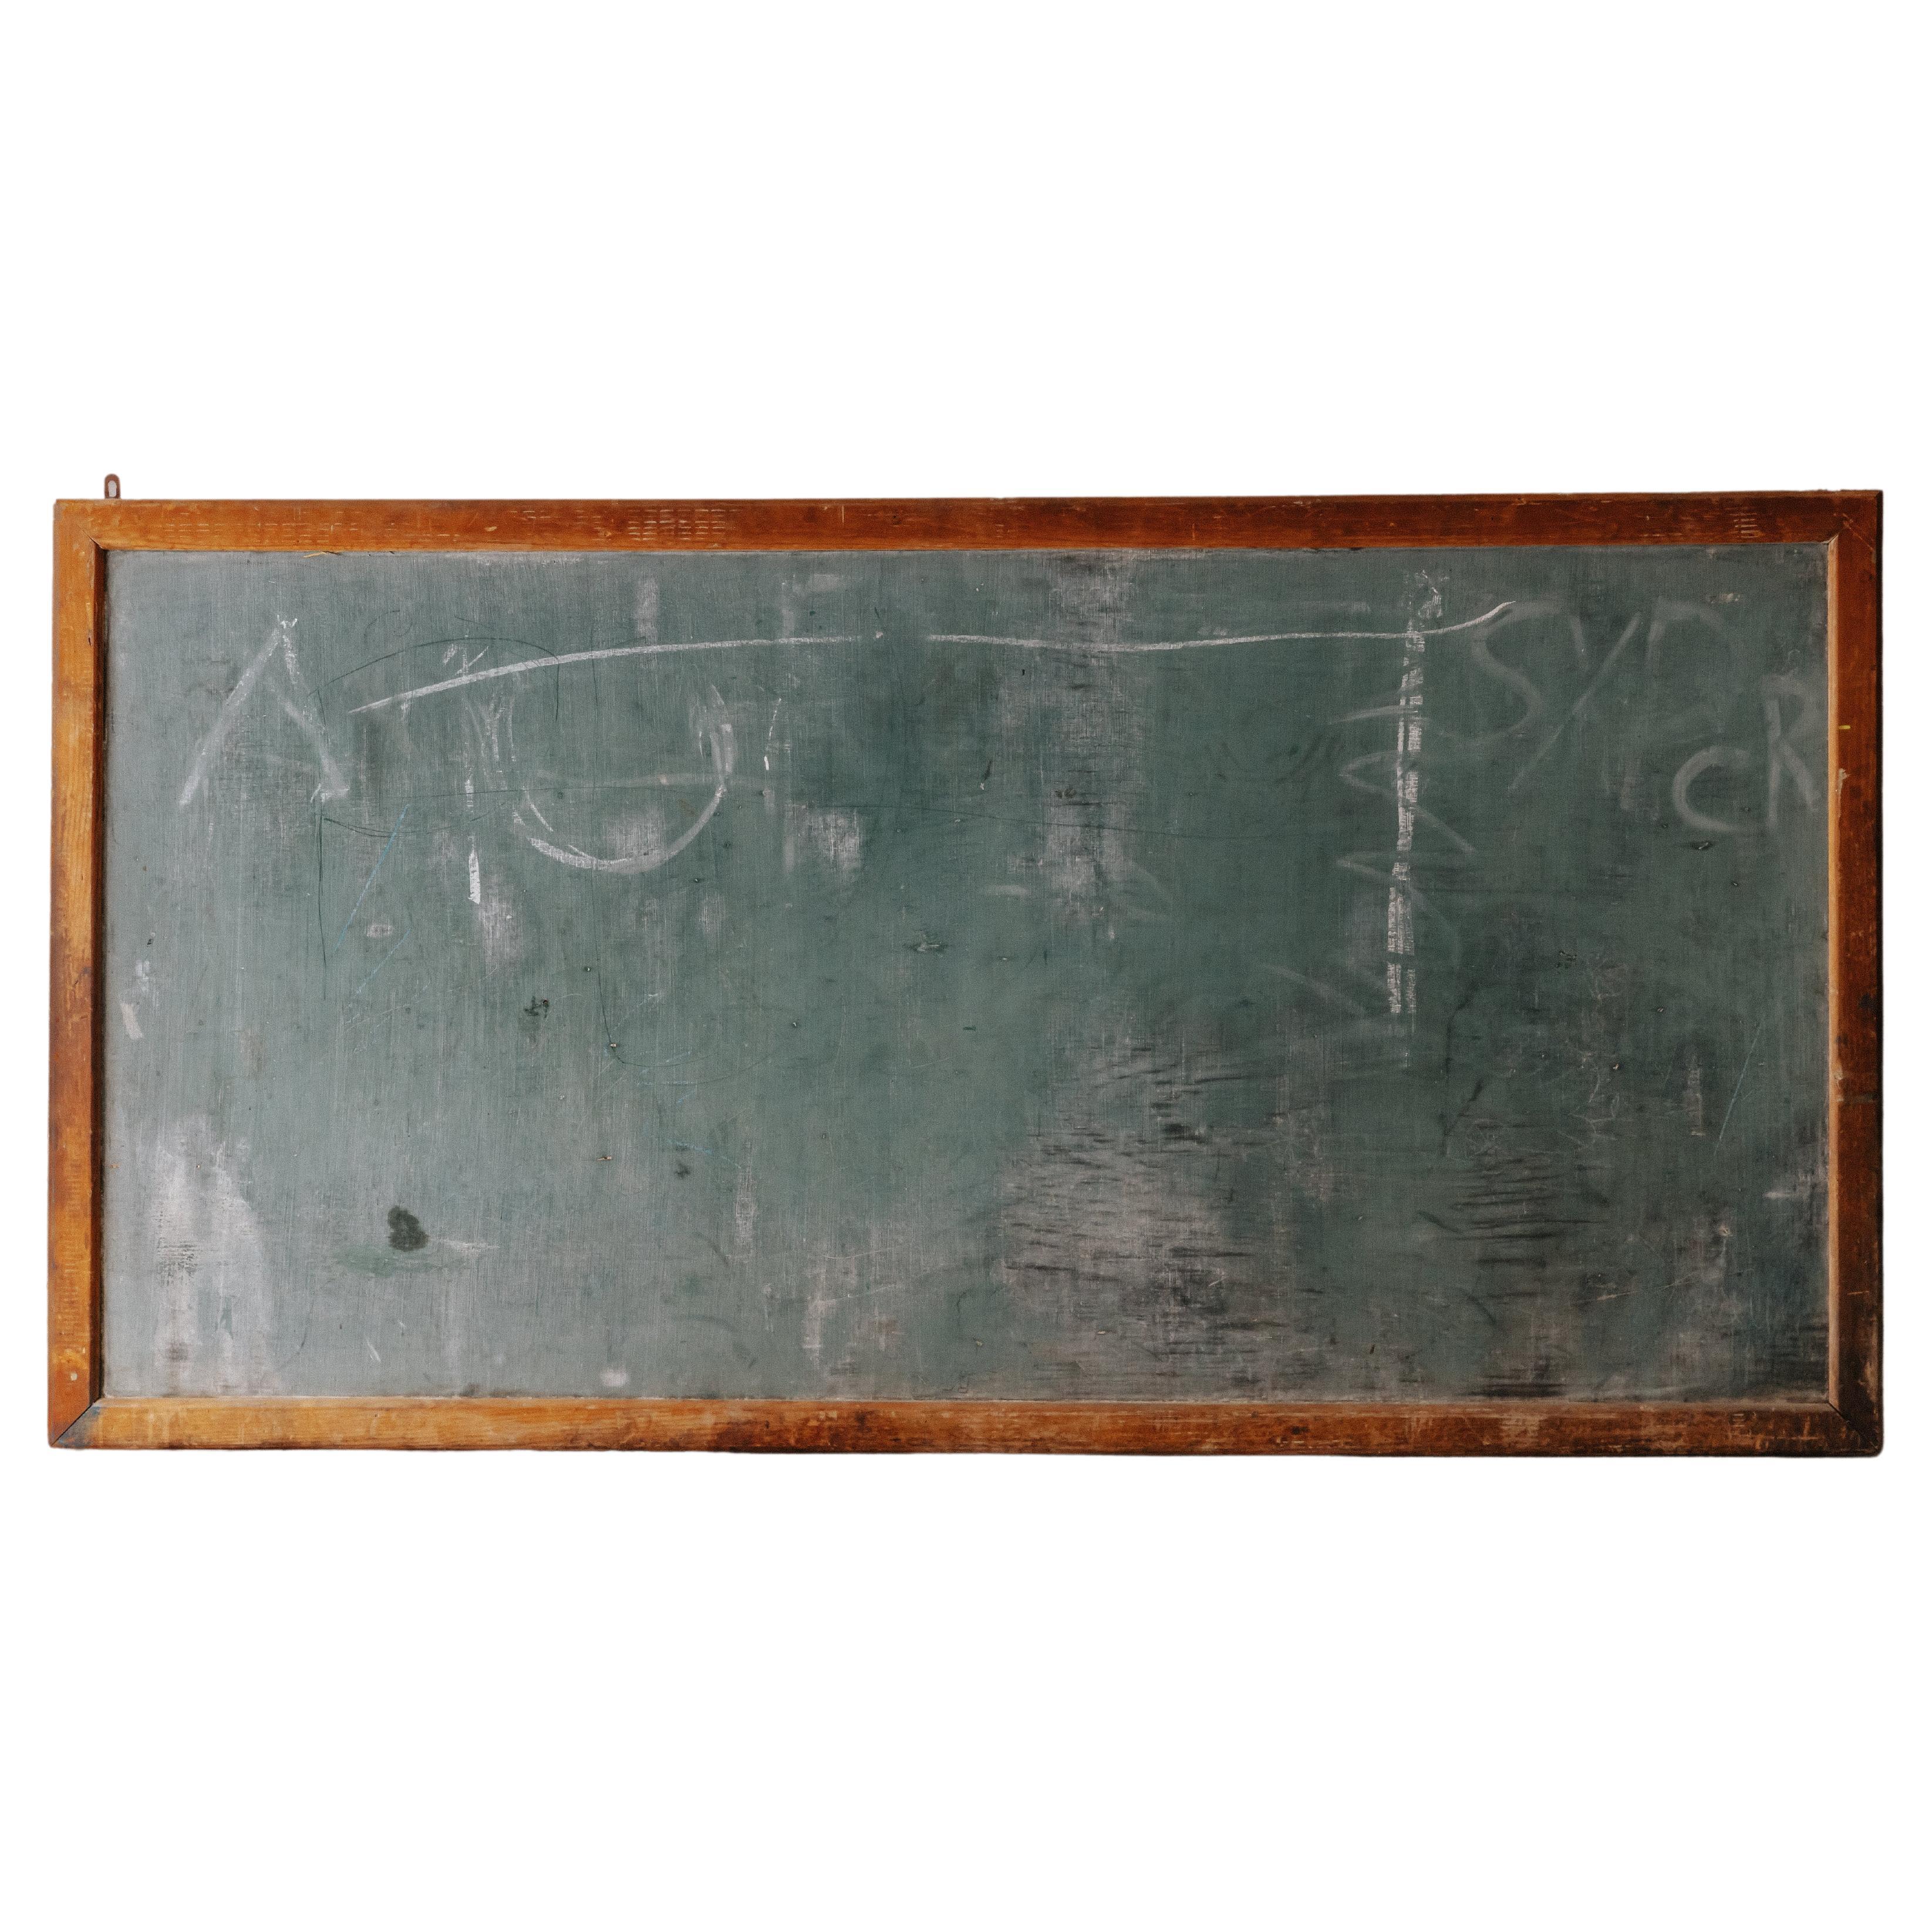 Large Vintage Chalkboard From France, Circa 1950